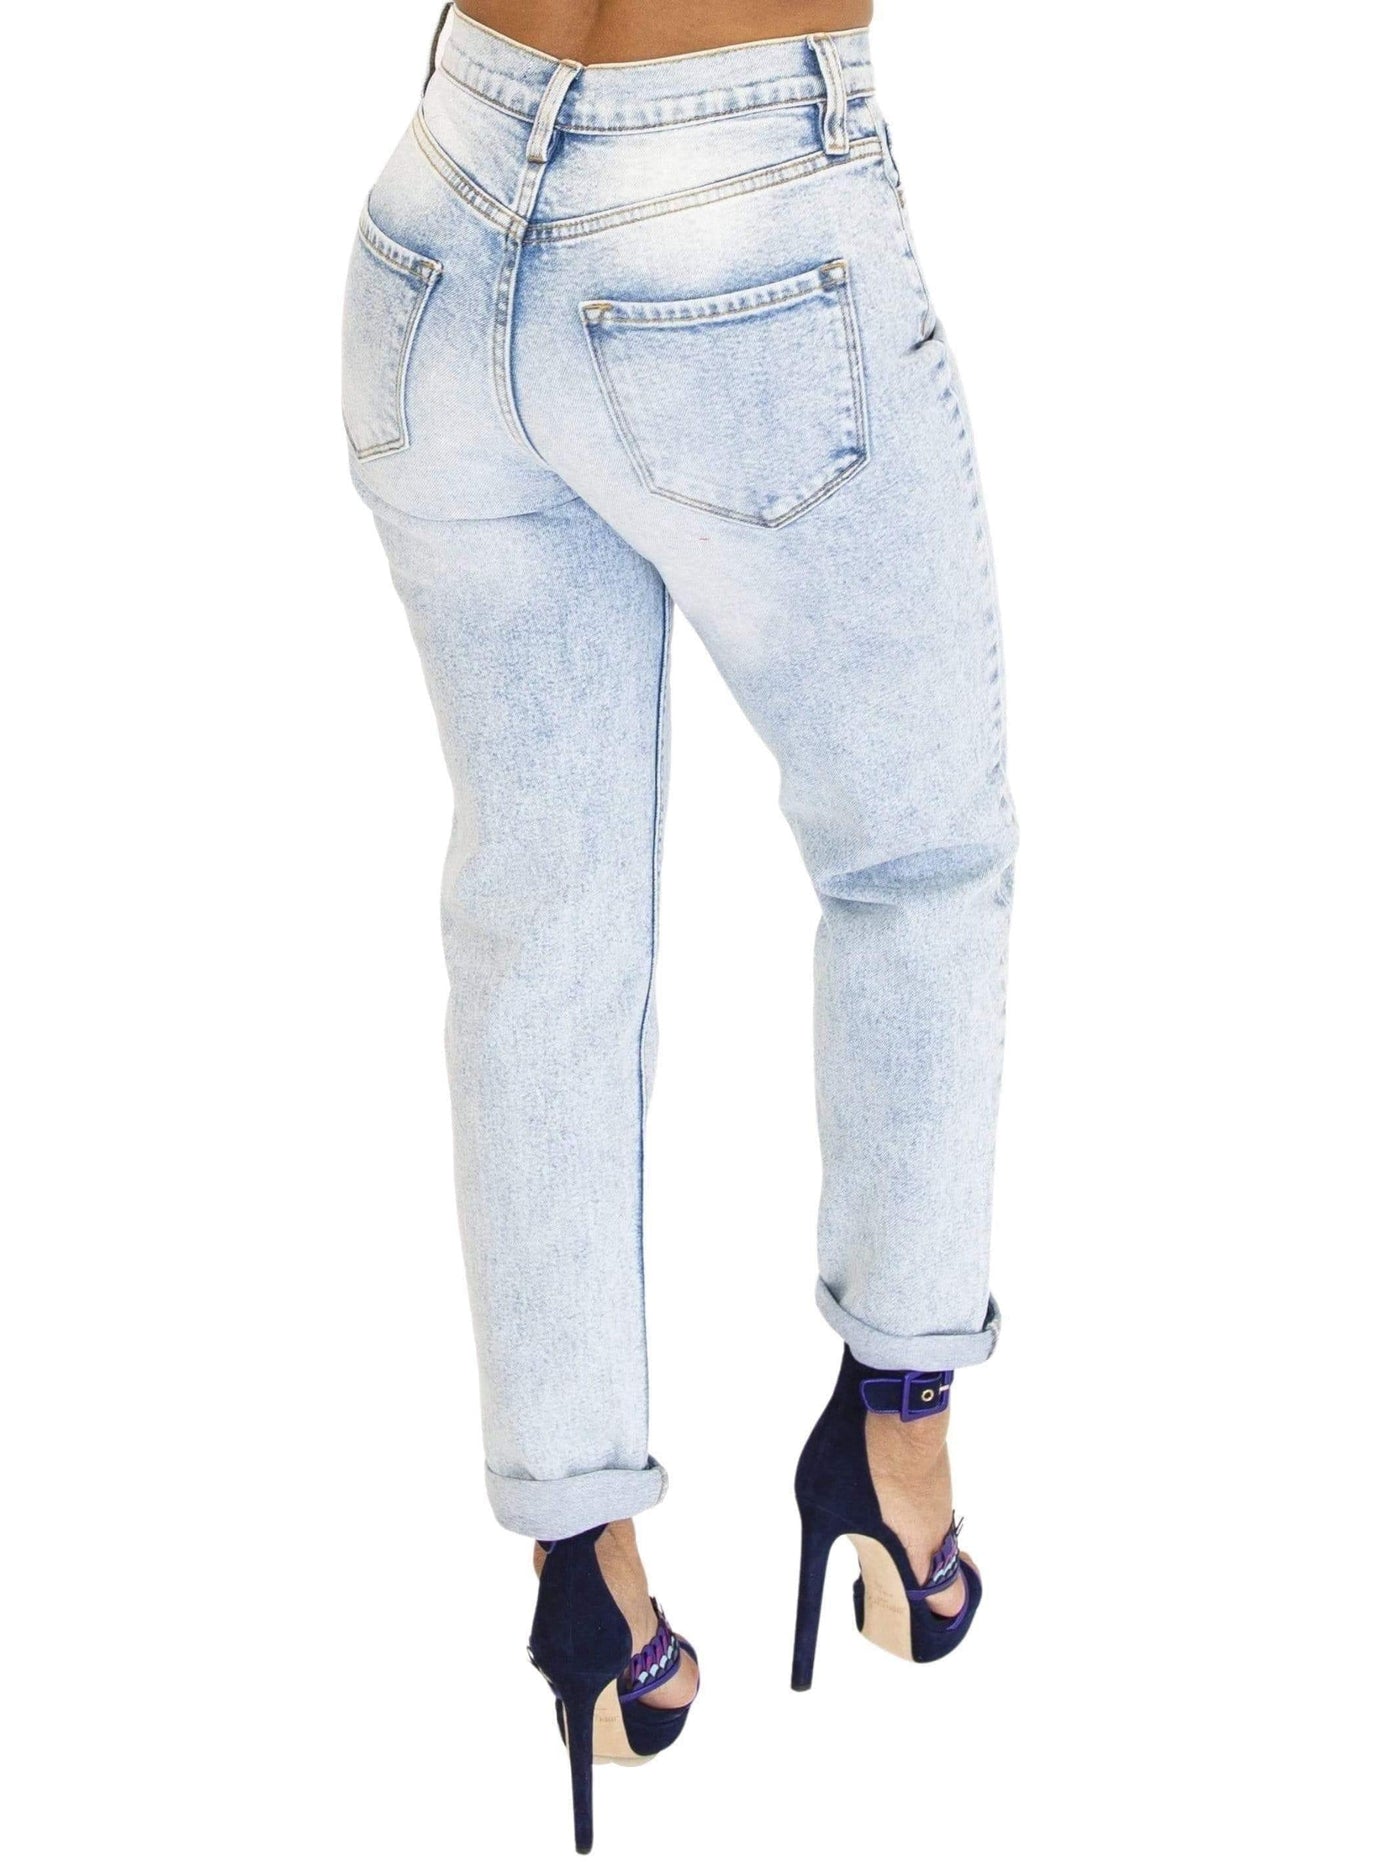 Jean-etics | High Rise Light Mom Jeans SIZE X-LARGE (15) - Statement Piece NY _tab_size-chart, basic, Blossom 2021, Blue, Bottom, Bottoms, Brooklyn Boutique, casual, chic, clearance, Denim, Fall, final, final sale, jeans, Last One, Light wash denim, Long Pants, Misses, mom jeans, Ships from USA, skinny fit, skinny pants, SPNY Exclusive, statement, statement piece, Statement Piece Boutique, statement piece ny, Statement Pieces, Statement Pieces Boutique, Women's Boutique Pants